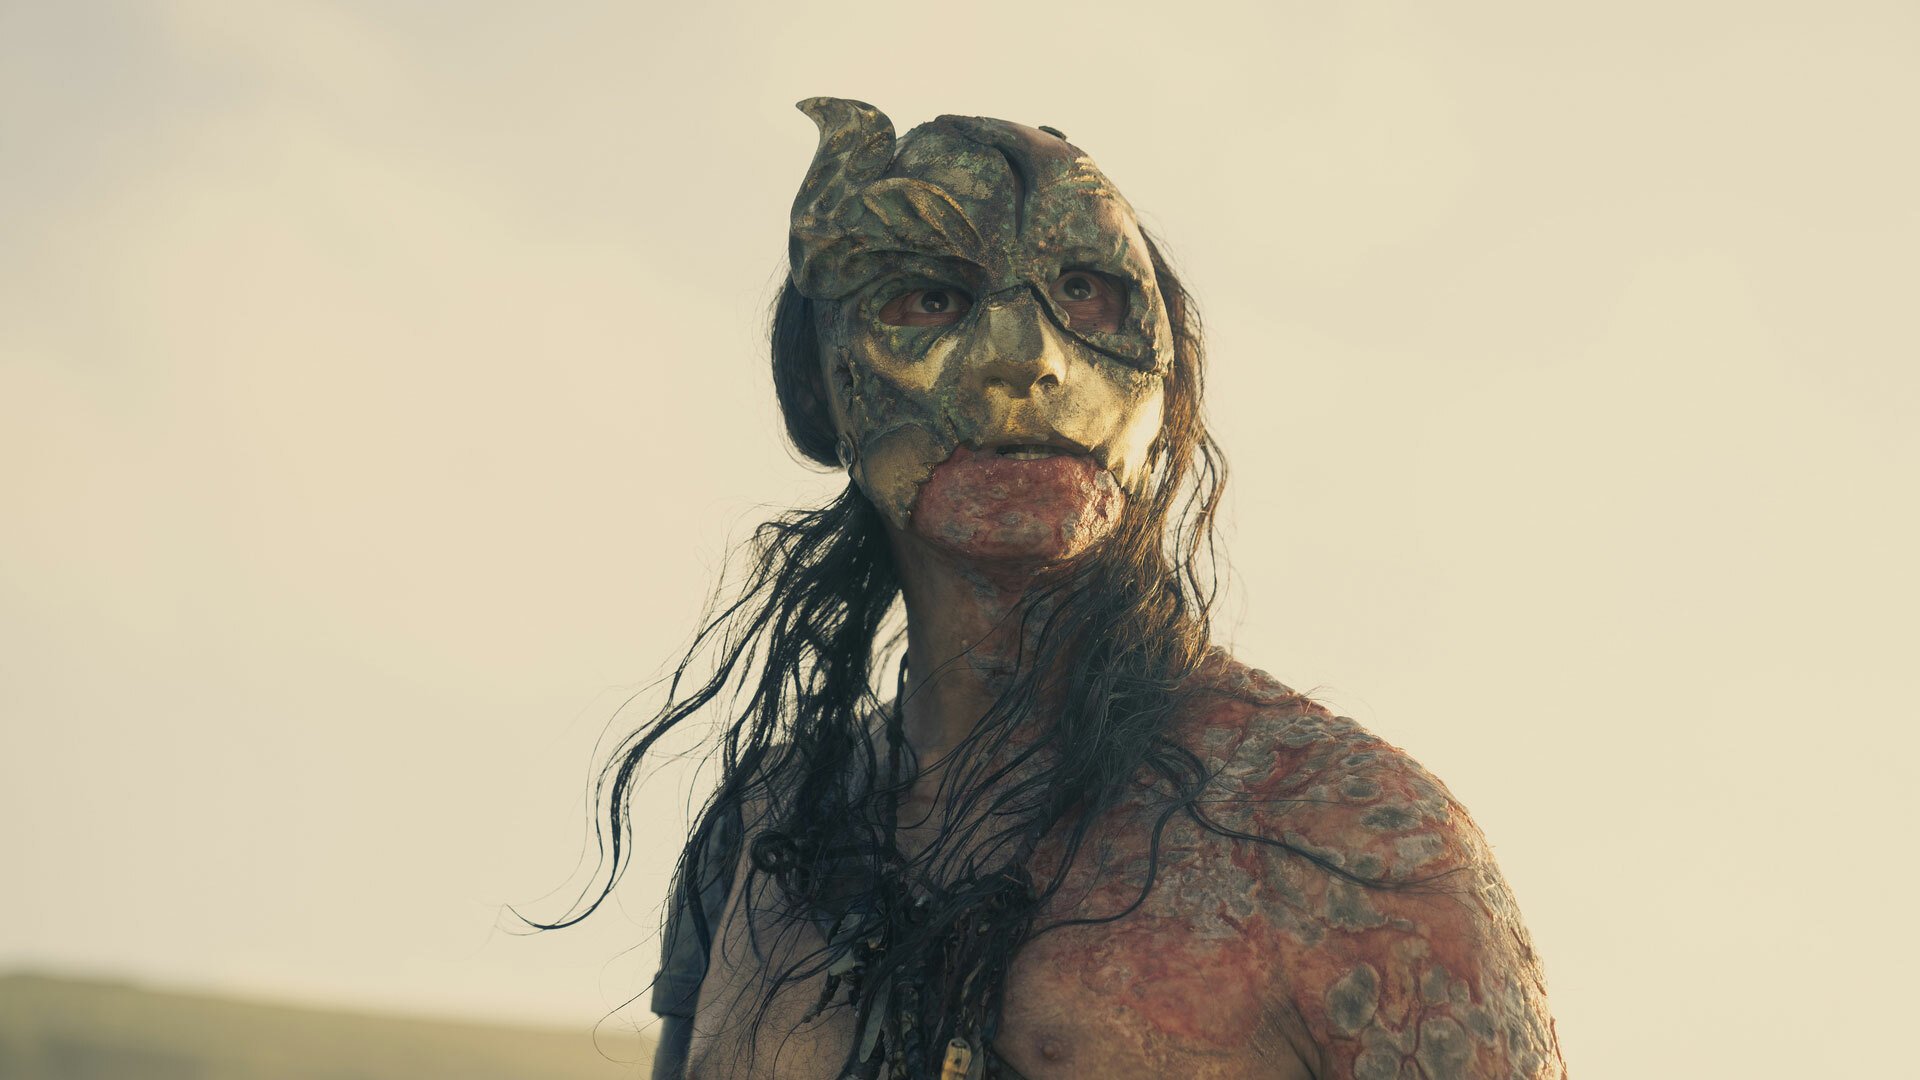 A shirtless man with a mask stands on a beach.